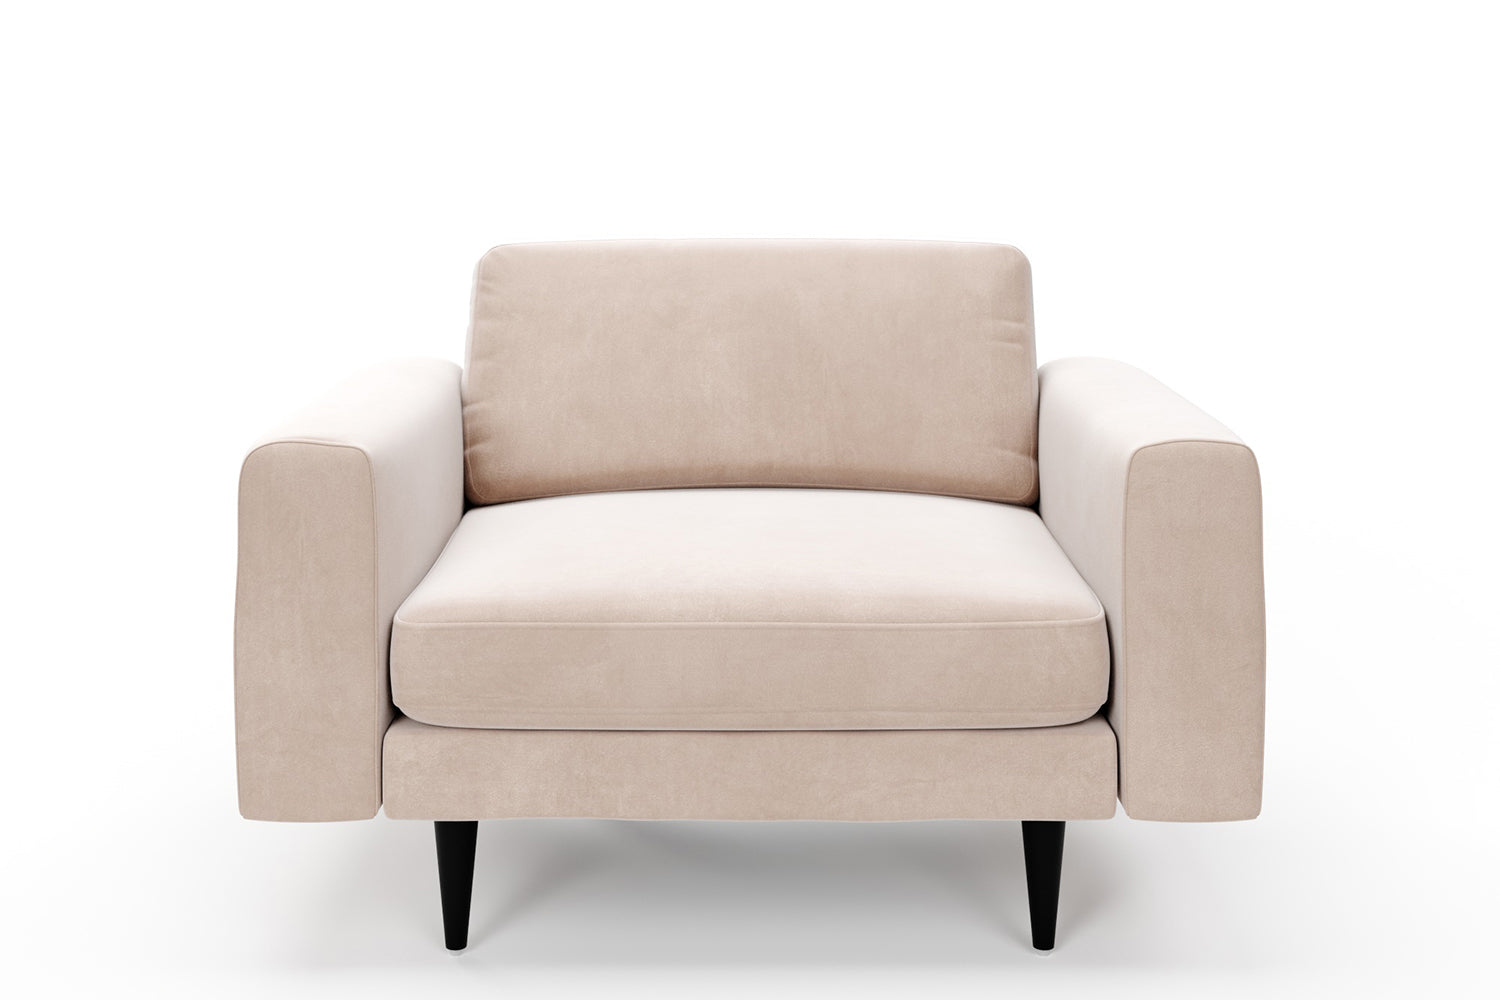 SNUG | The Big Chill 1.5 Seater Snuggler in Taupe variant_40414876434480